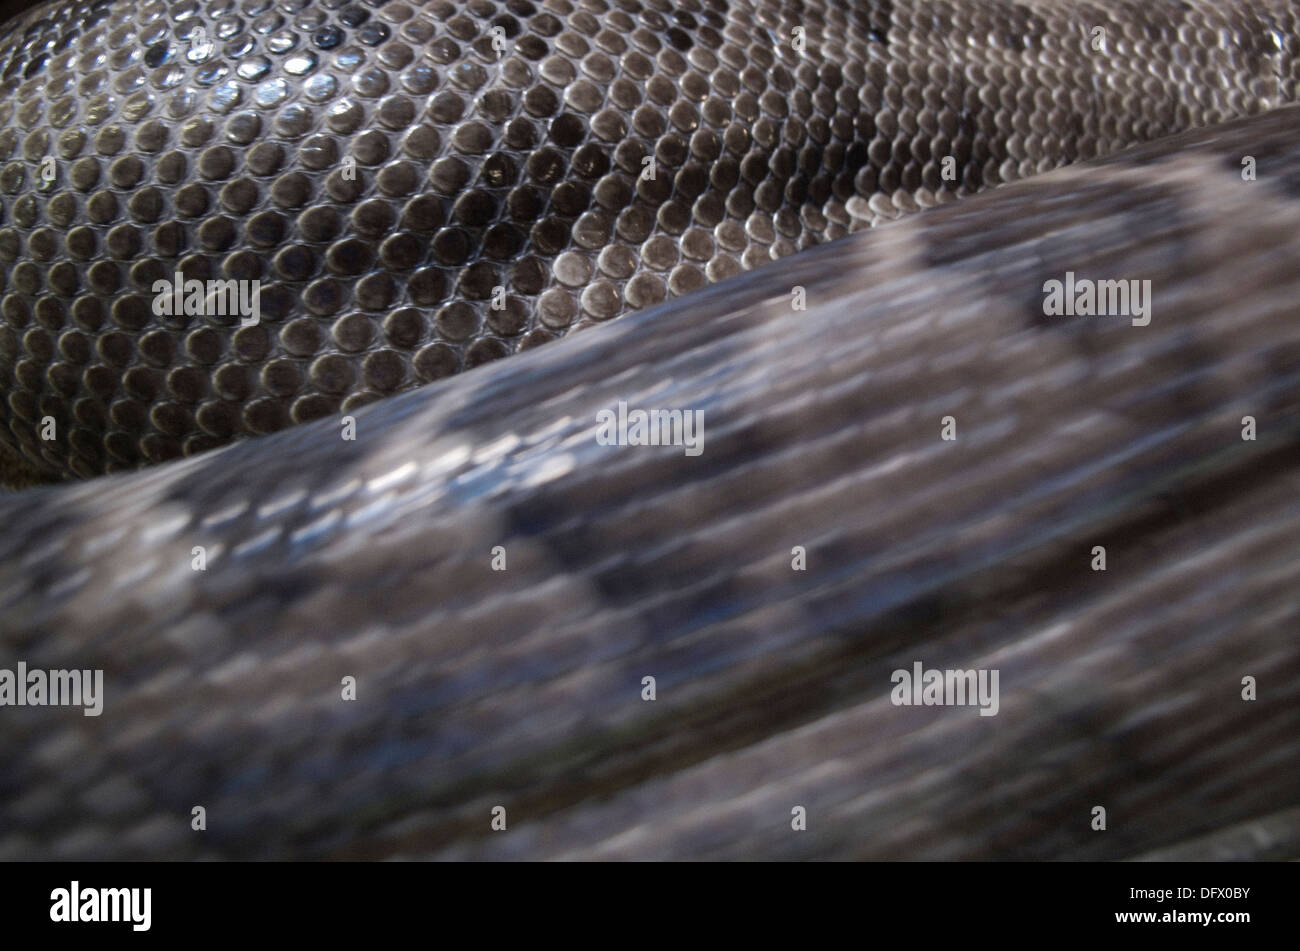 Coiled Snake, Close Up Stock Photo